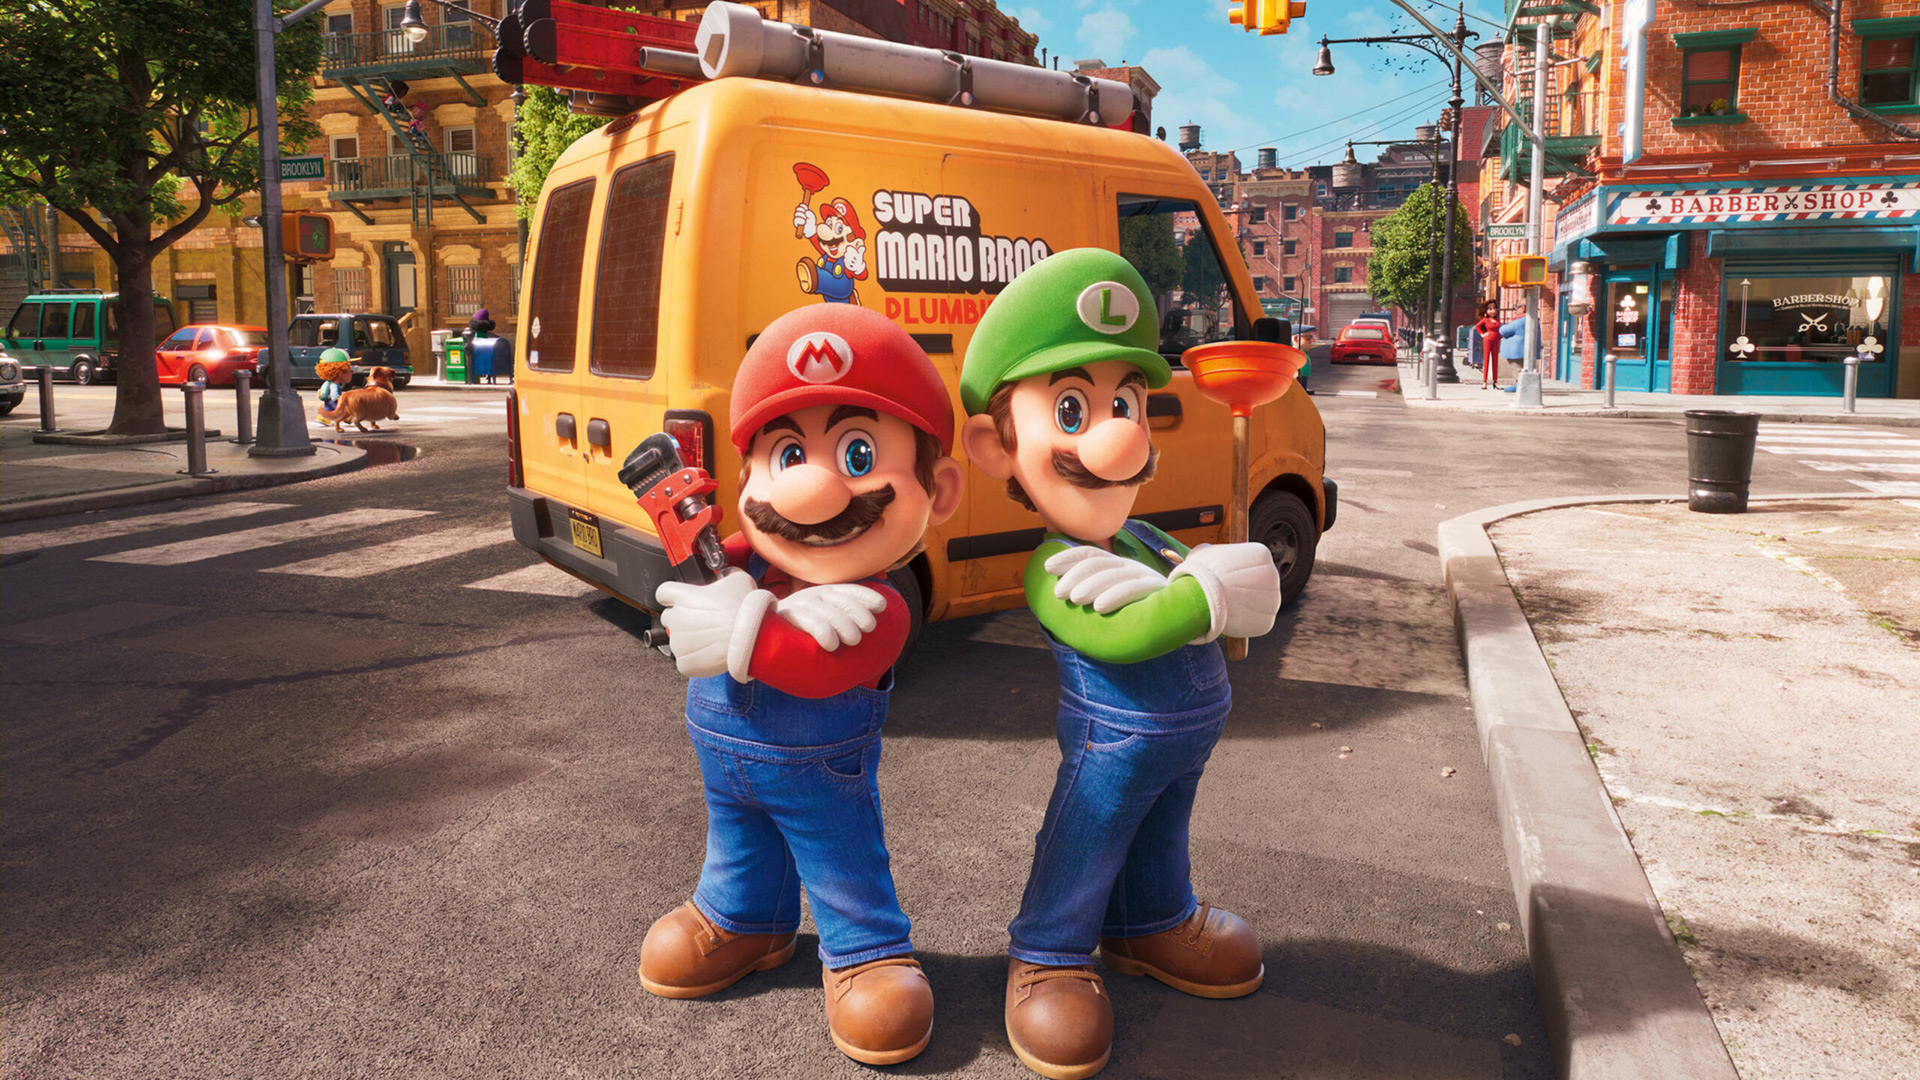 The Super Mario Bros. Movie is heading to video-on-demand services May 16